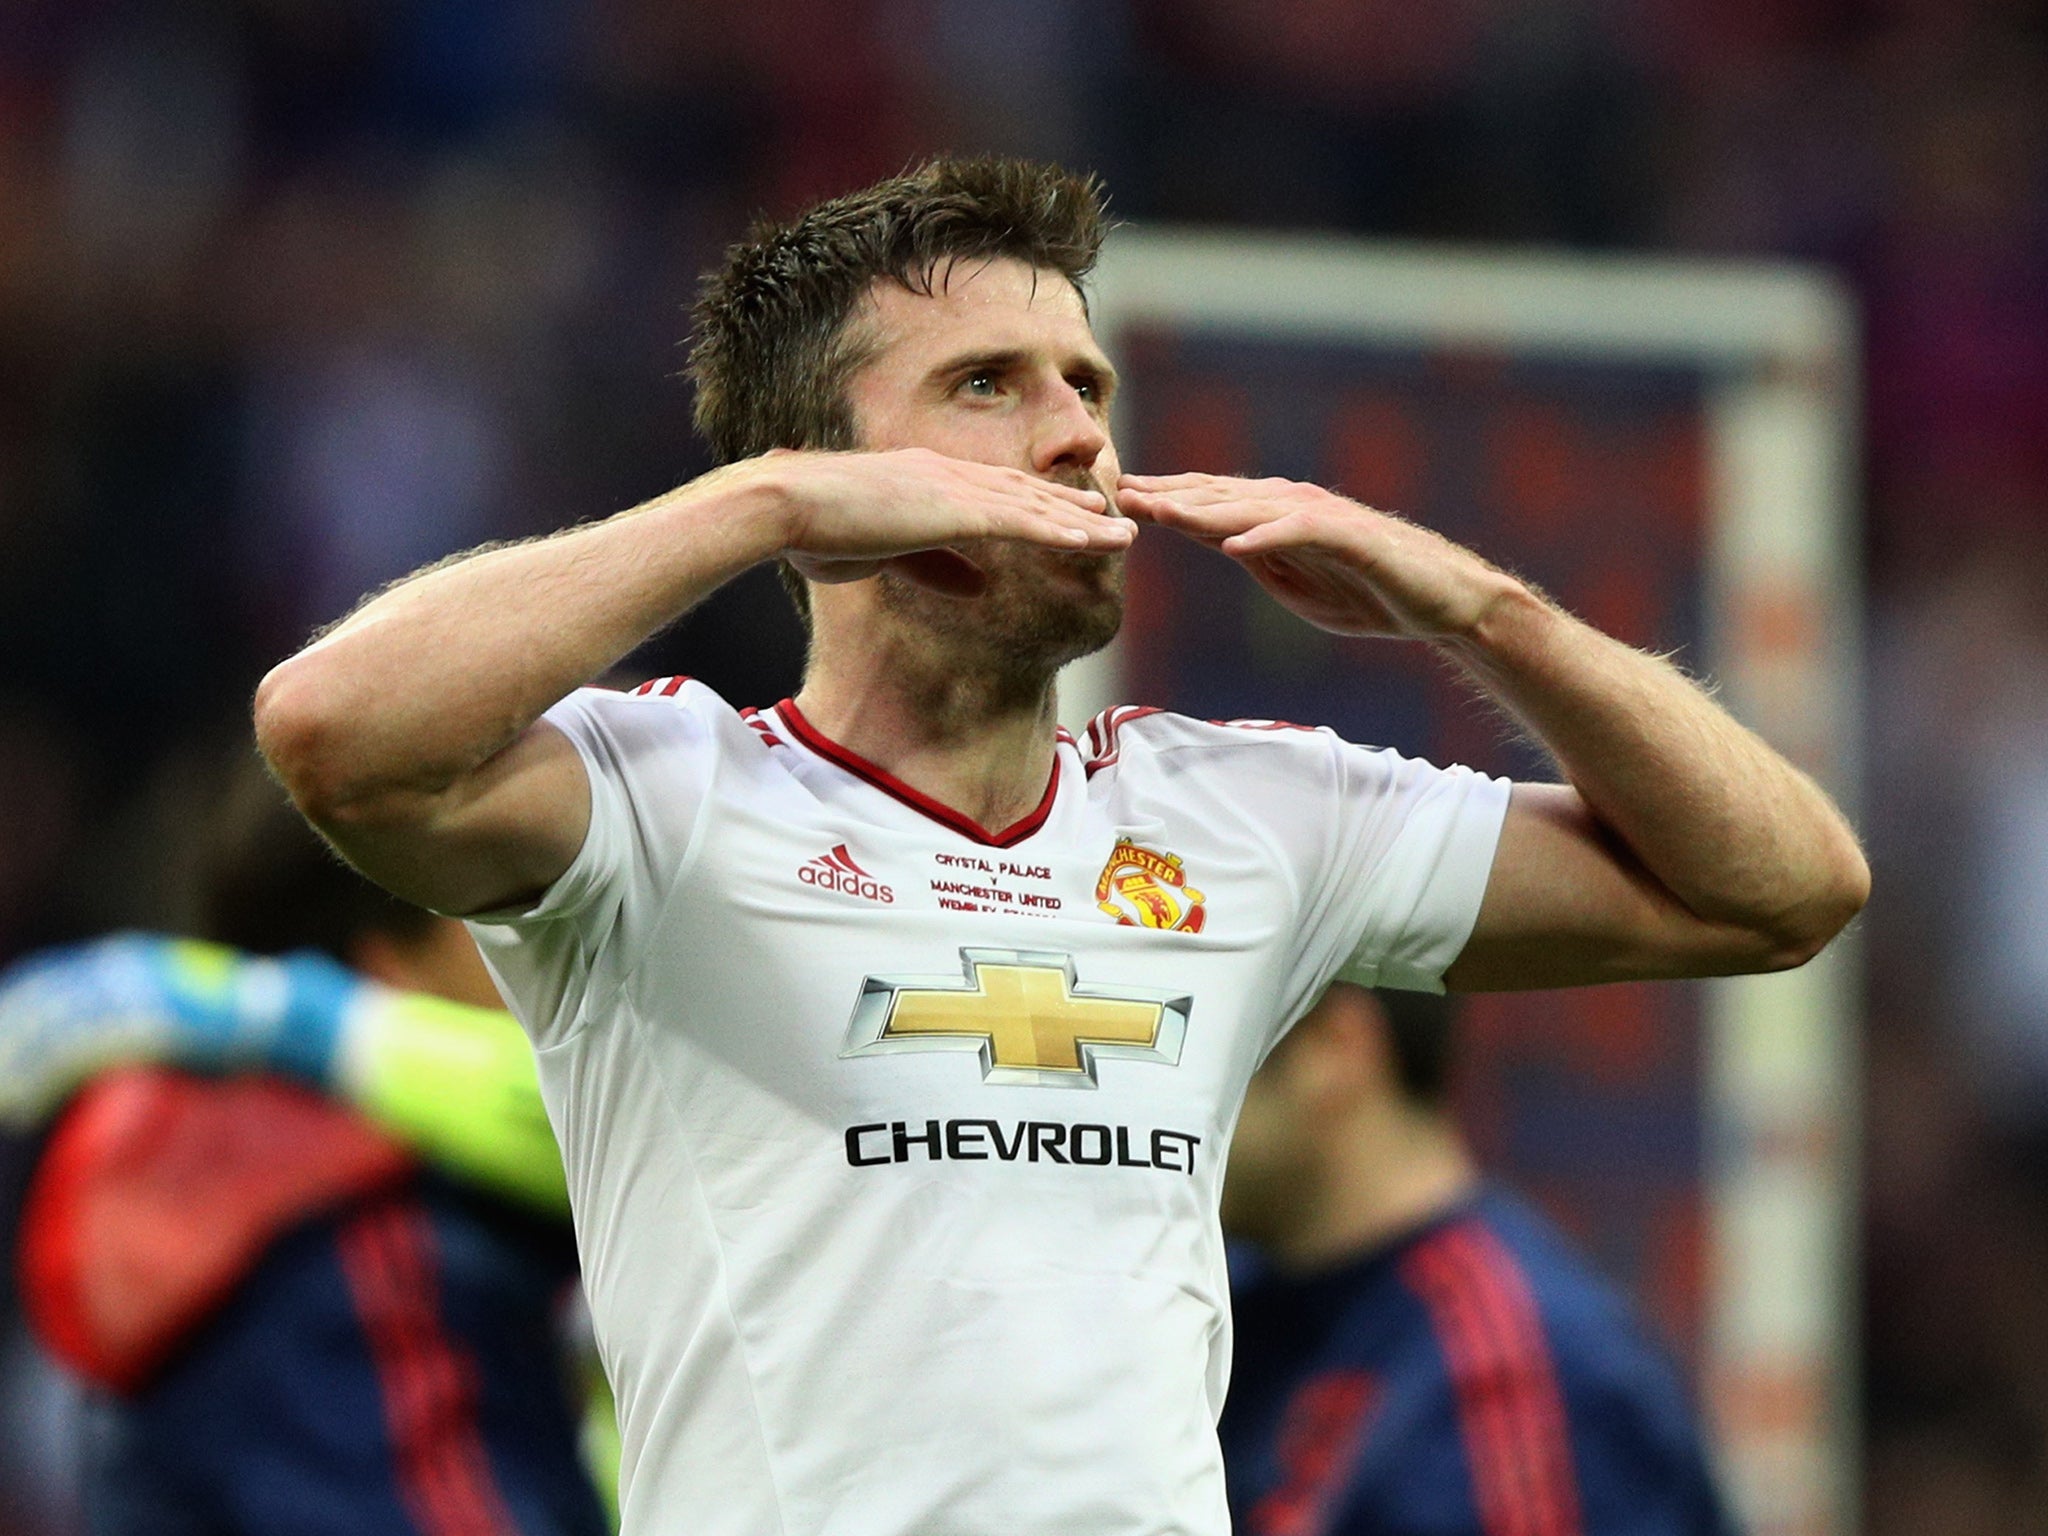 Carrick's current contract expires at the end of next month